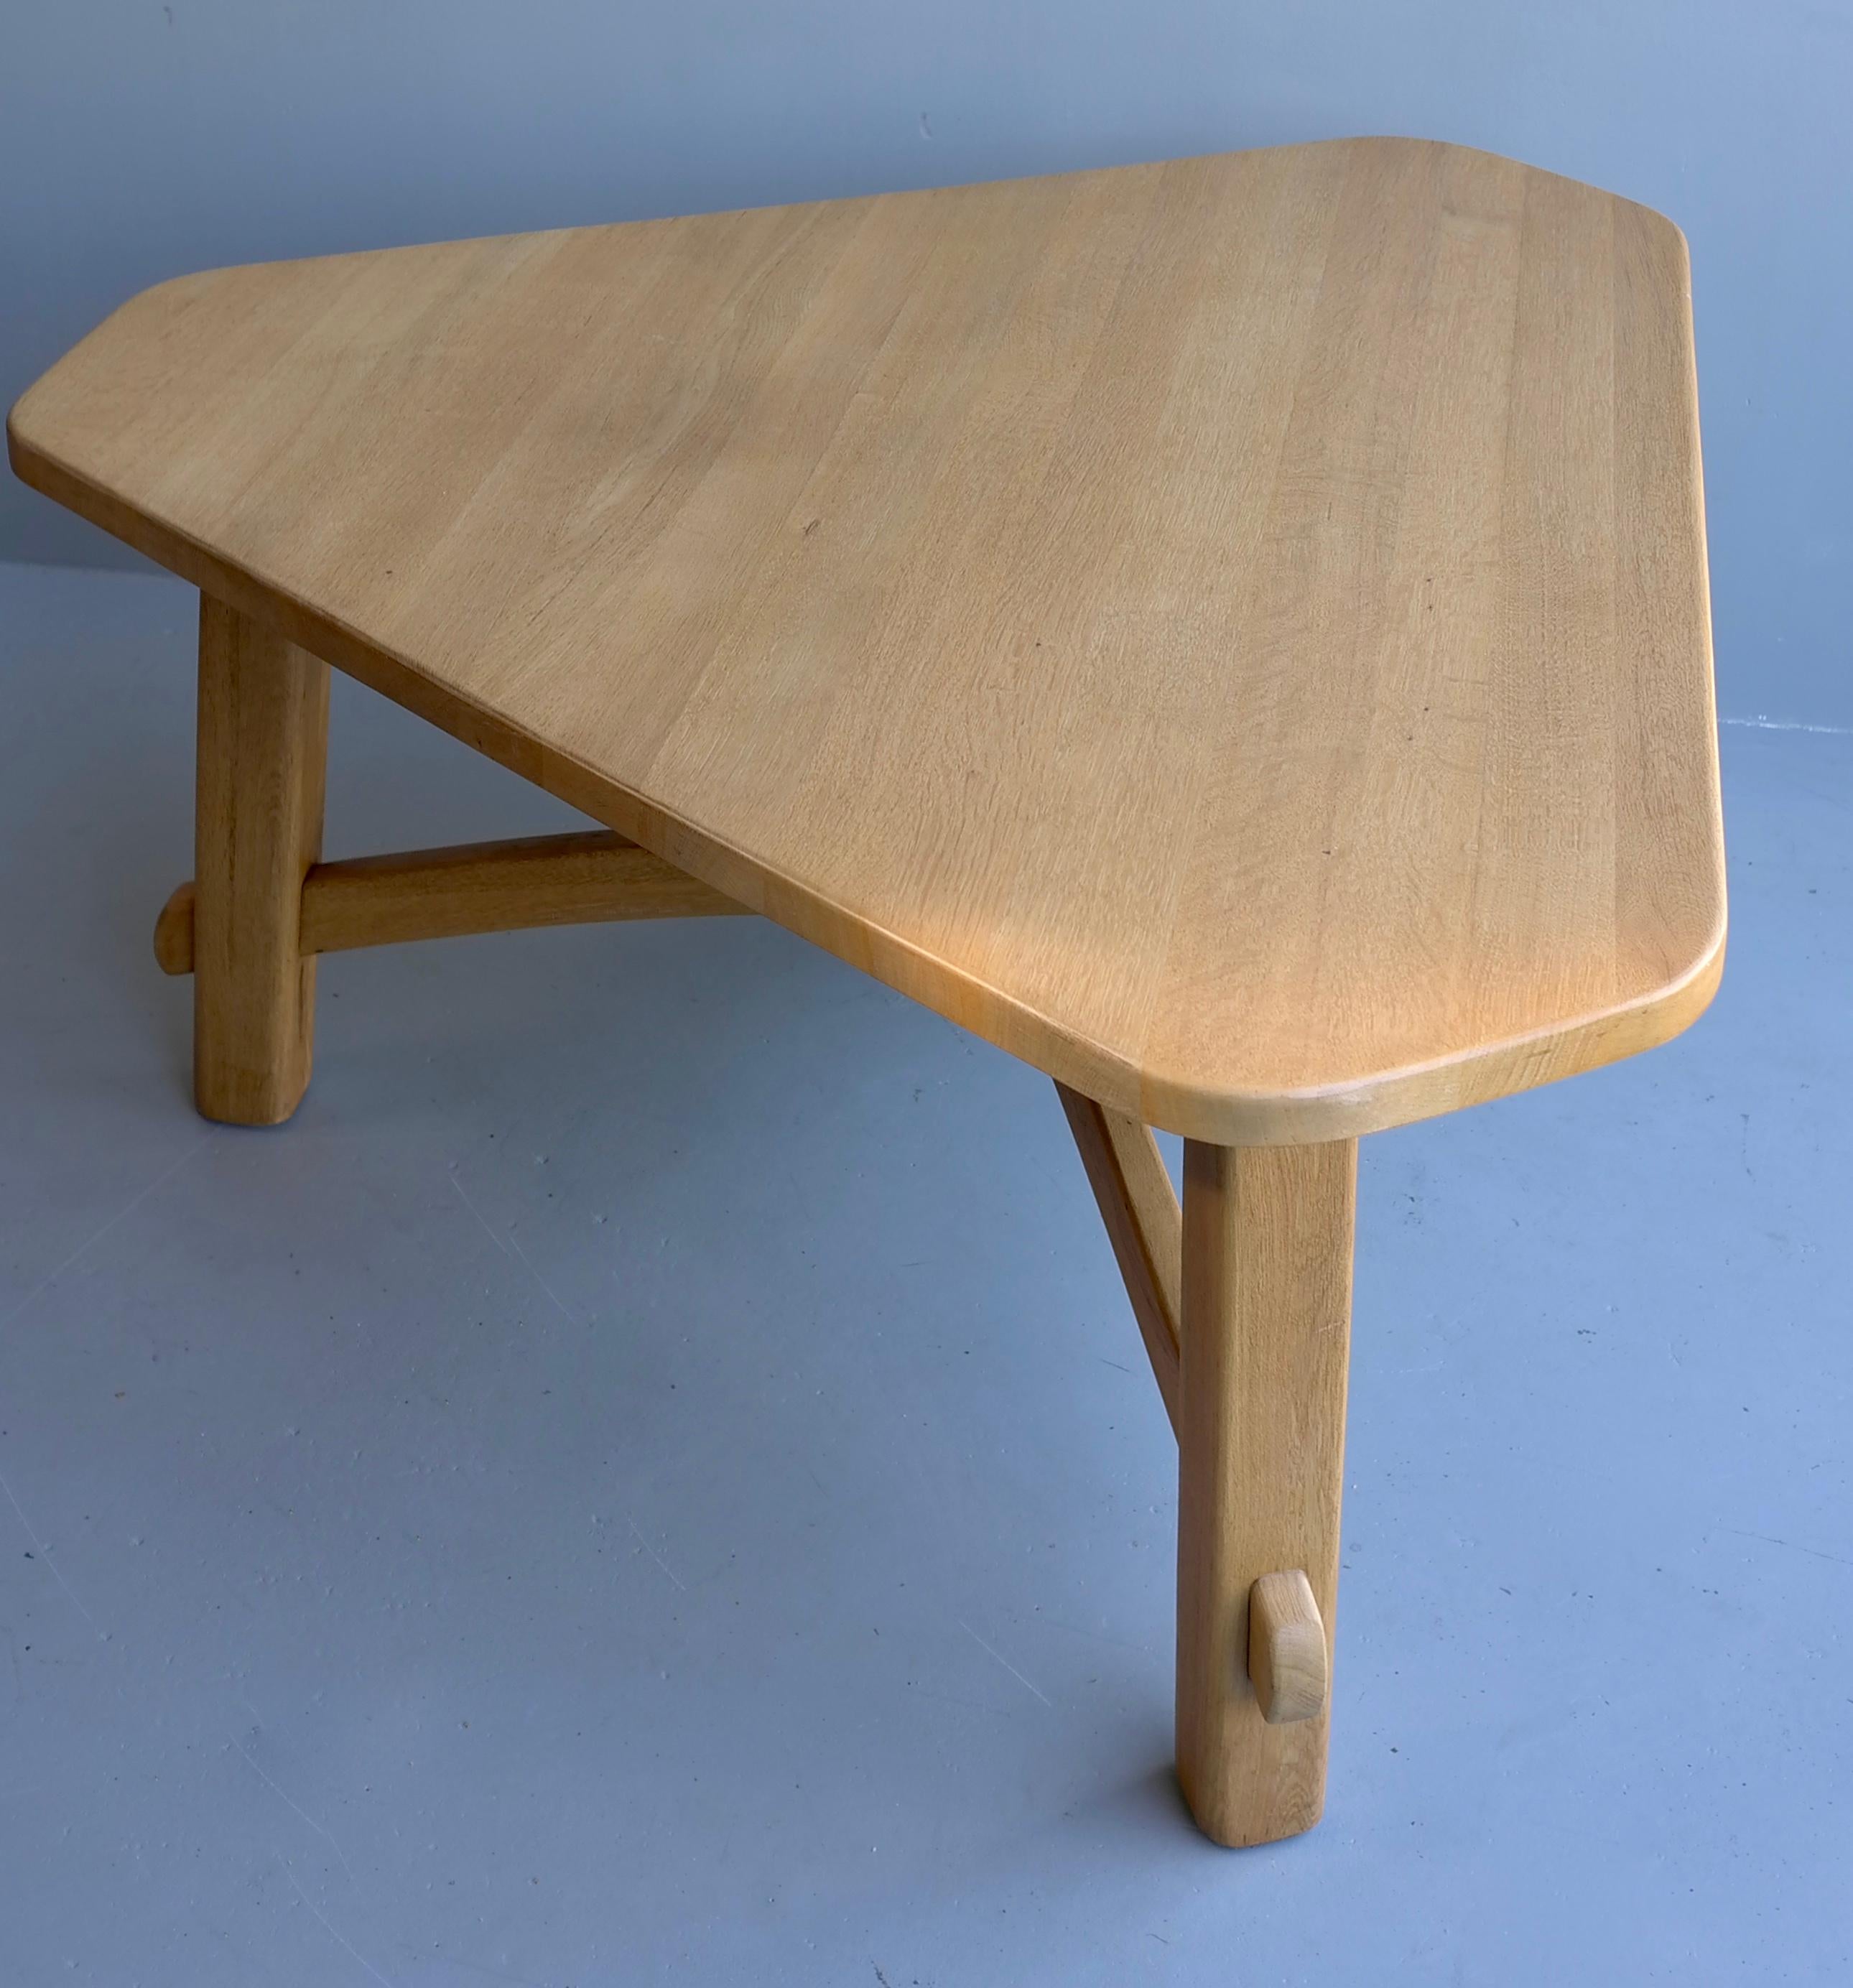 Triangel solid oak dining table in style of Pierre Chapo, France 1960's

Two chairs can be placed on each side, or more spatially one on each side.